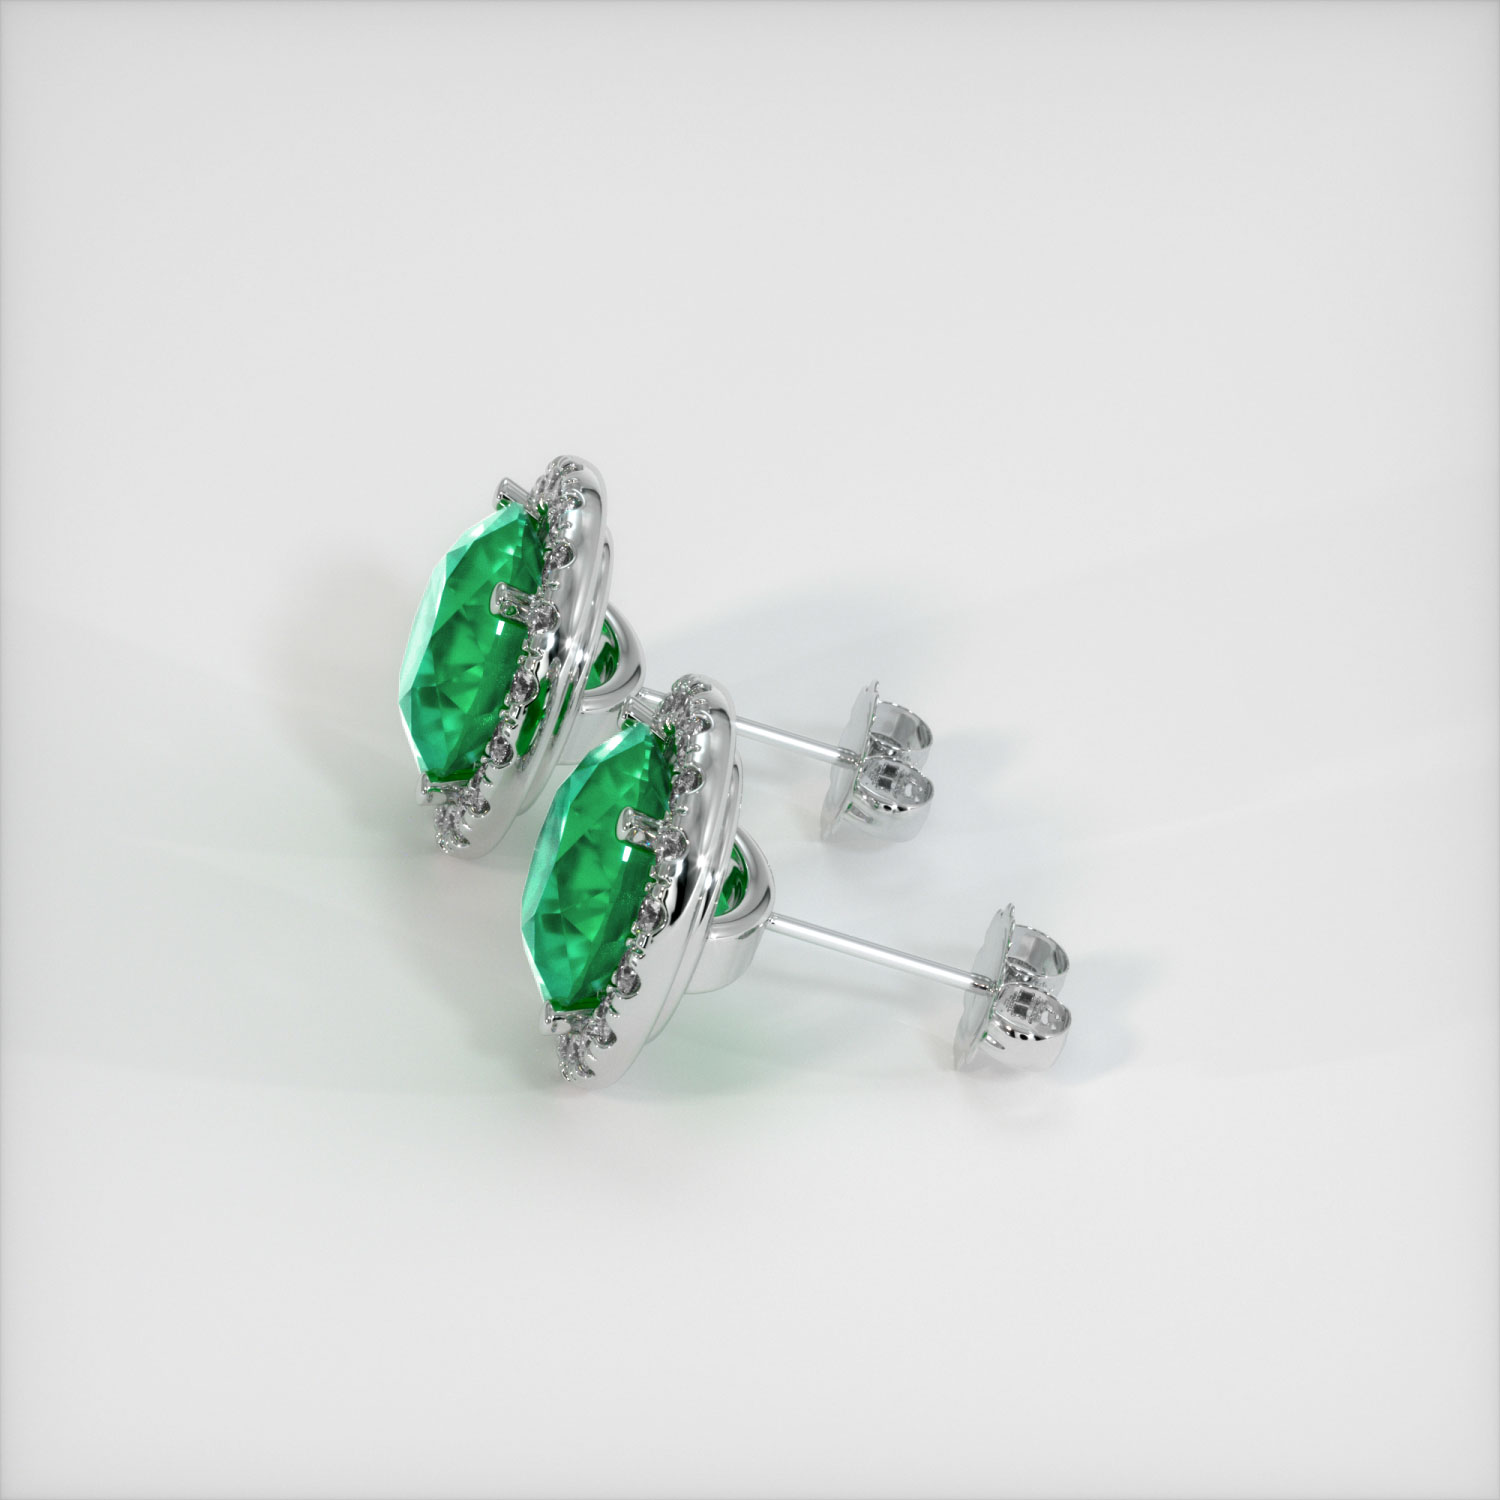 Details about   0.69Ct Princess & Round Cut Emerald & Diamond Stud Earrings 14K Yellow Gold Over 